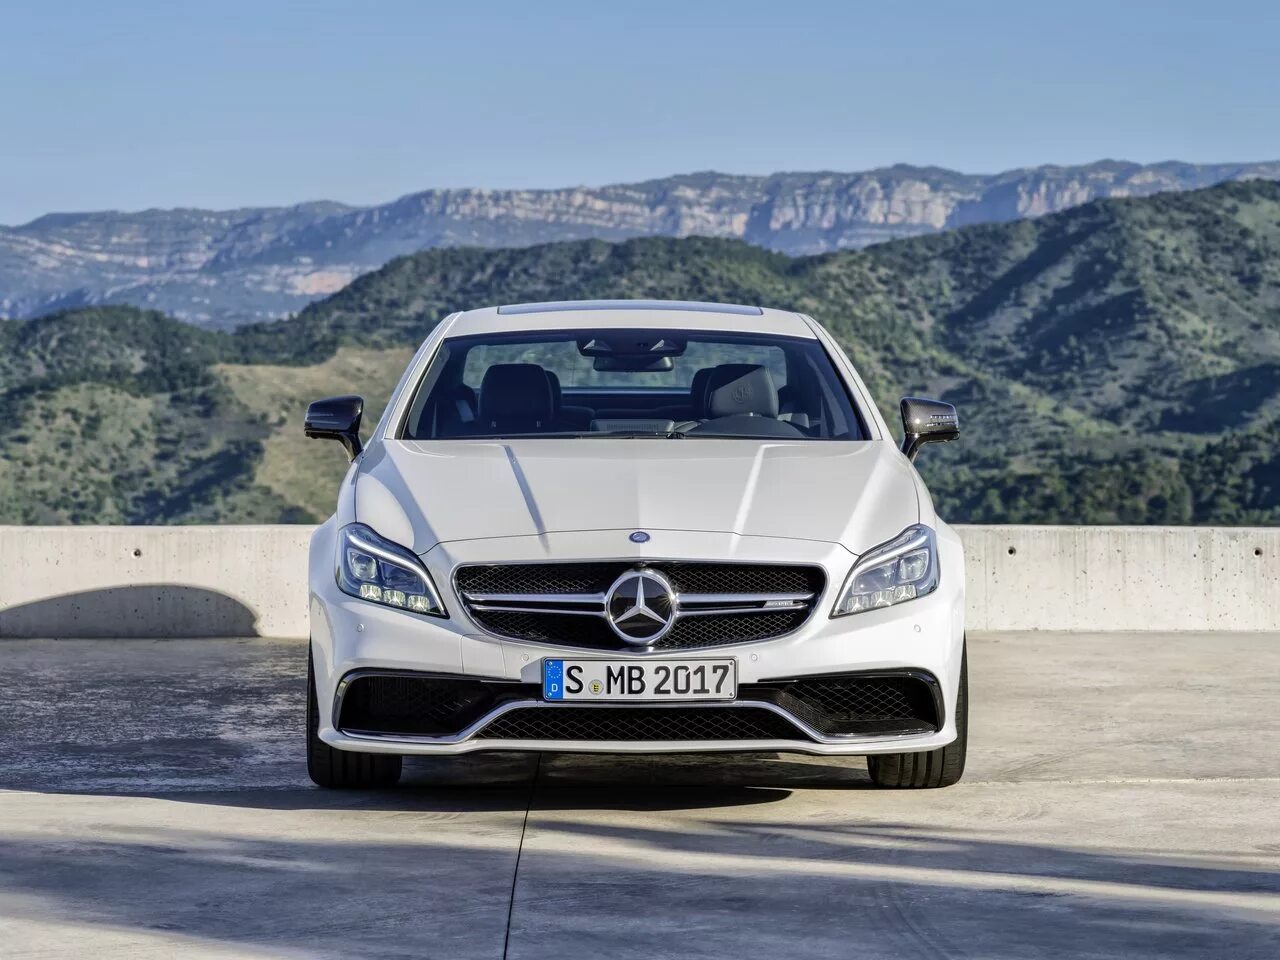 Mercedes 218. Мерседес CLS 218 AMG. Мерседес Бенц ЦЛС 63 АМГ. Mercedes CLS 63 AMG 218. Mercedes Benz CLS 63 AMG 2015.